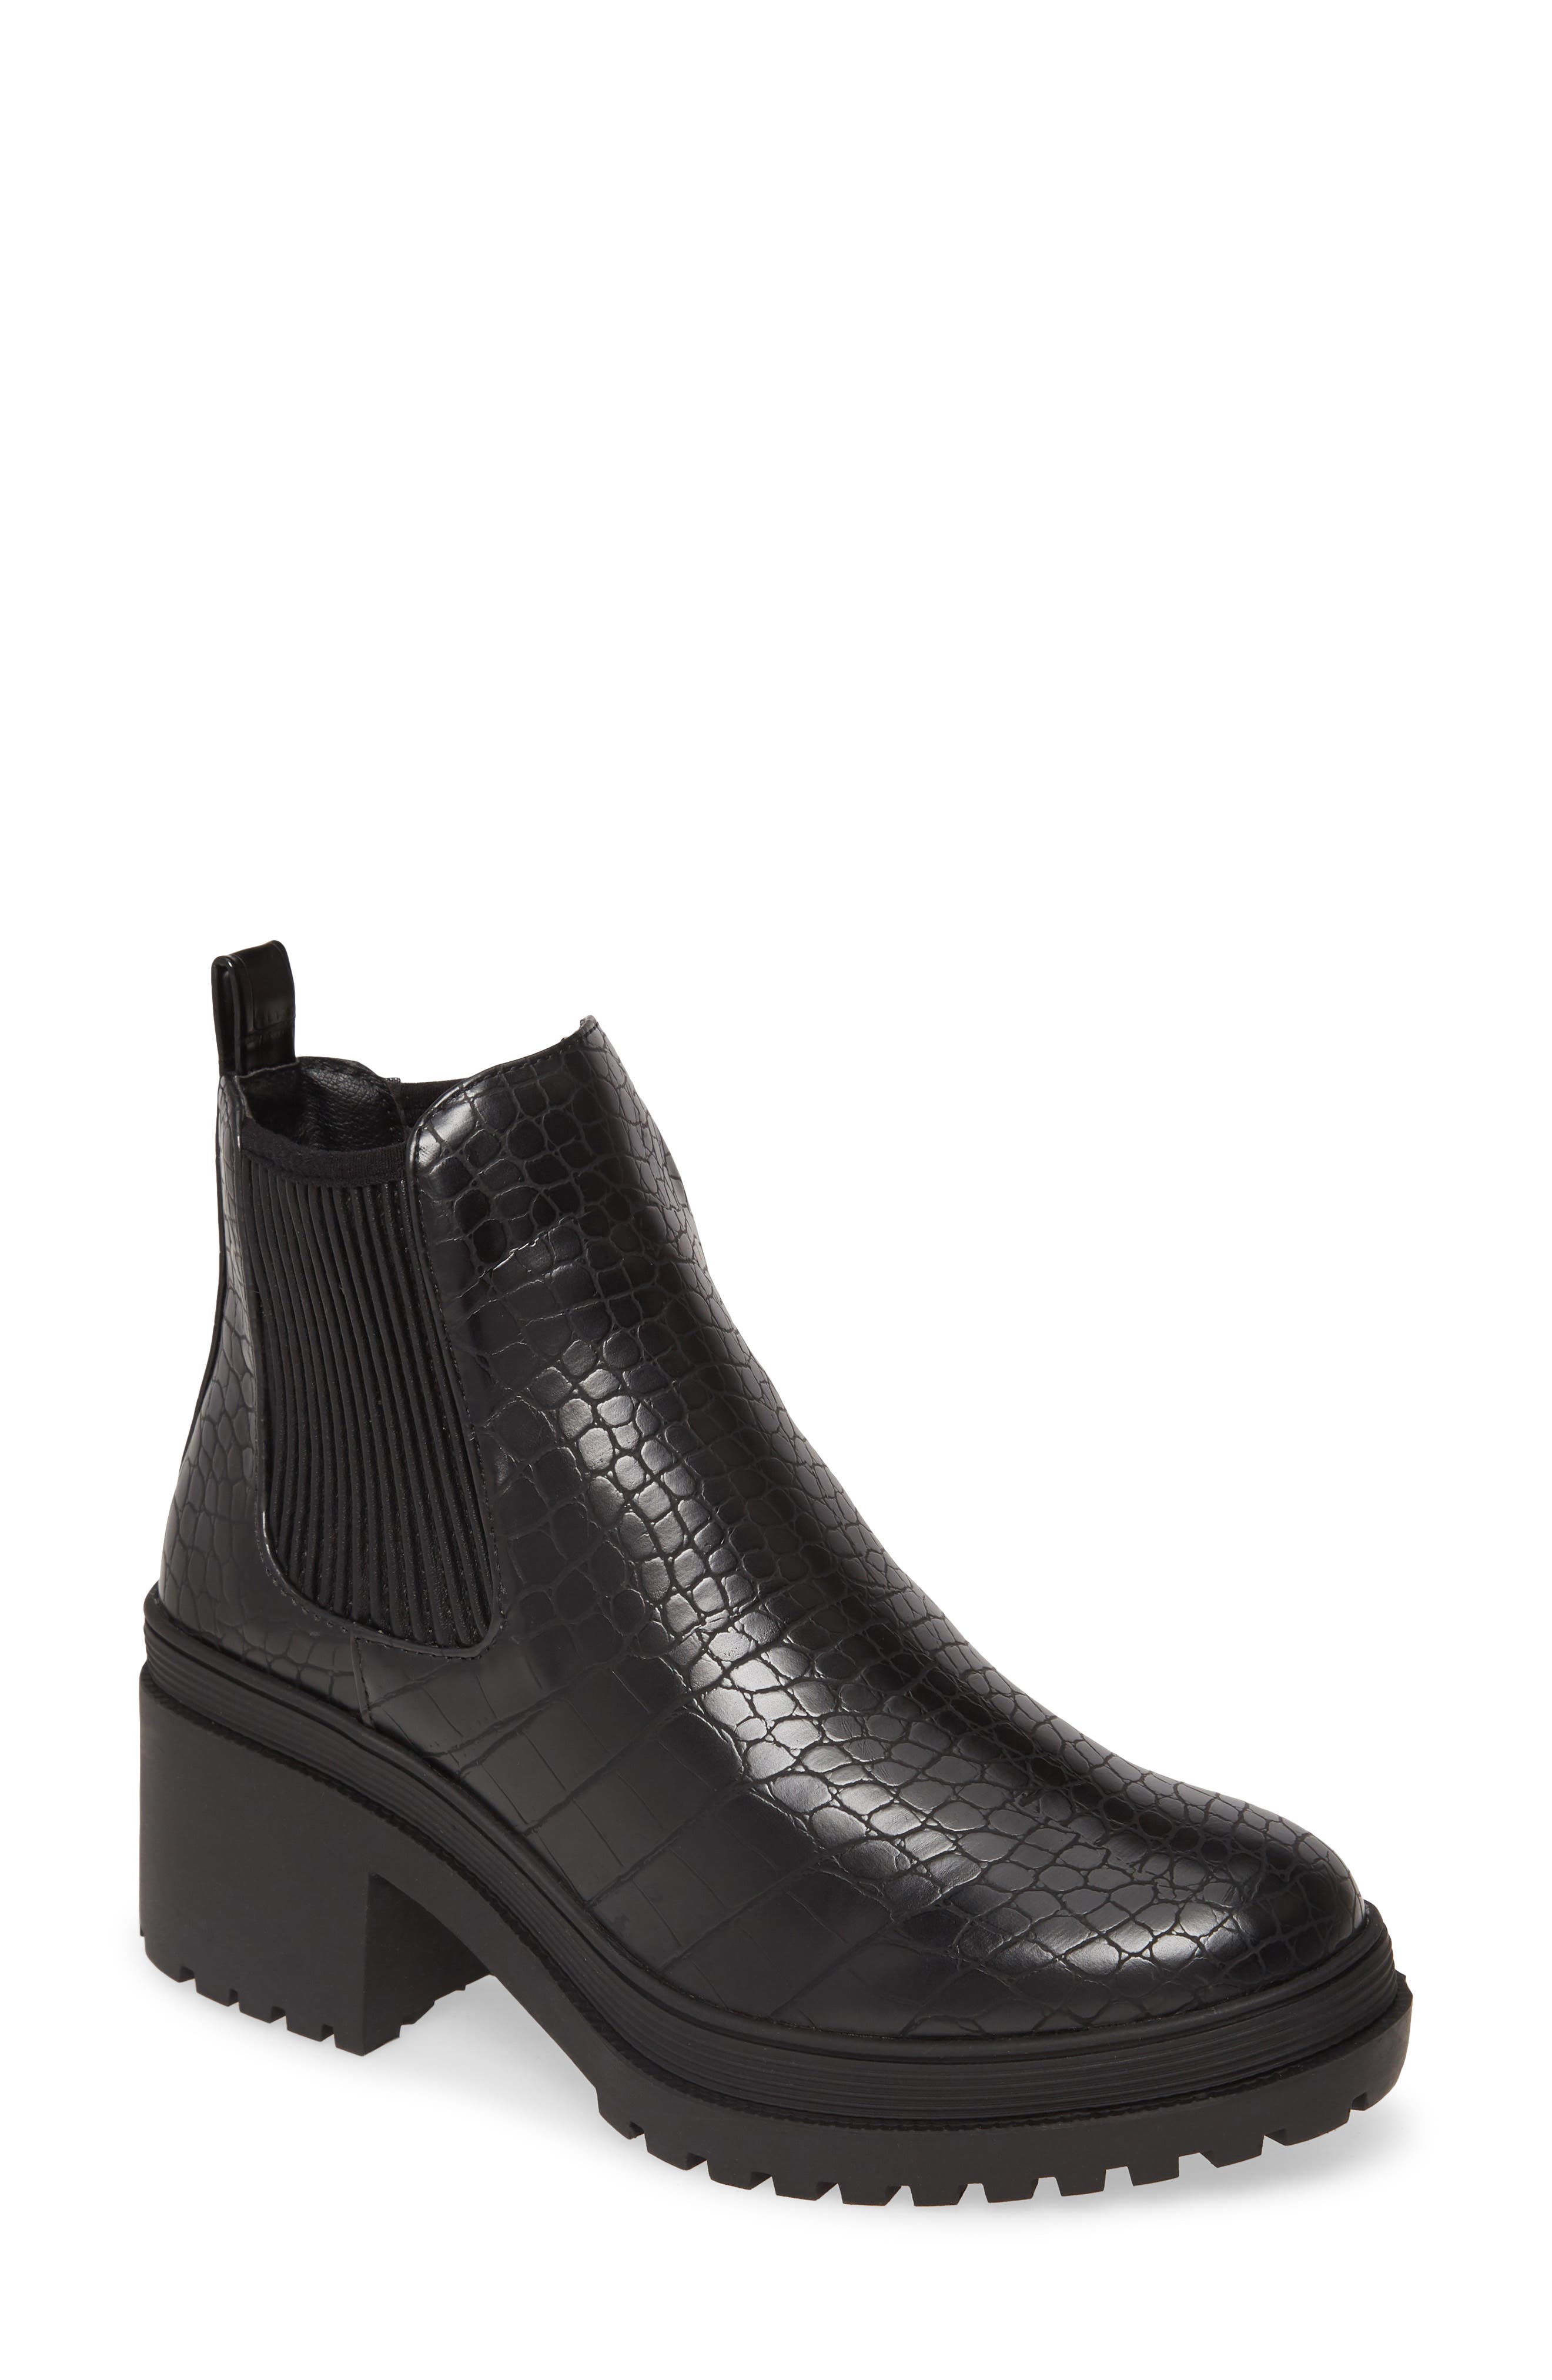 topshop chelsea boots womens